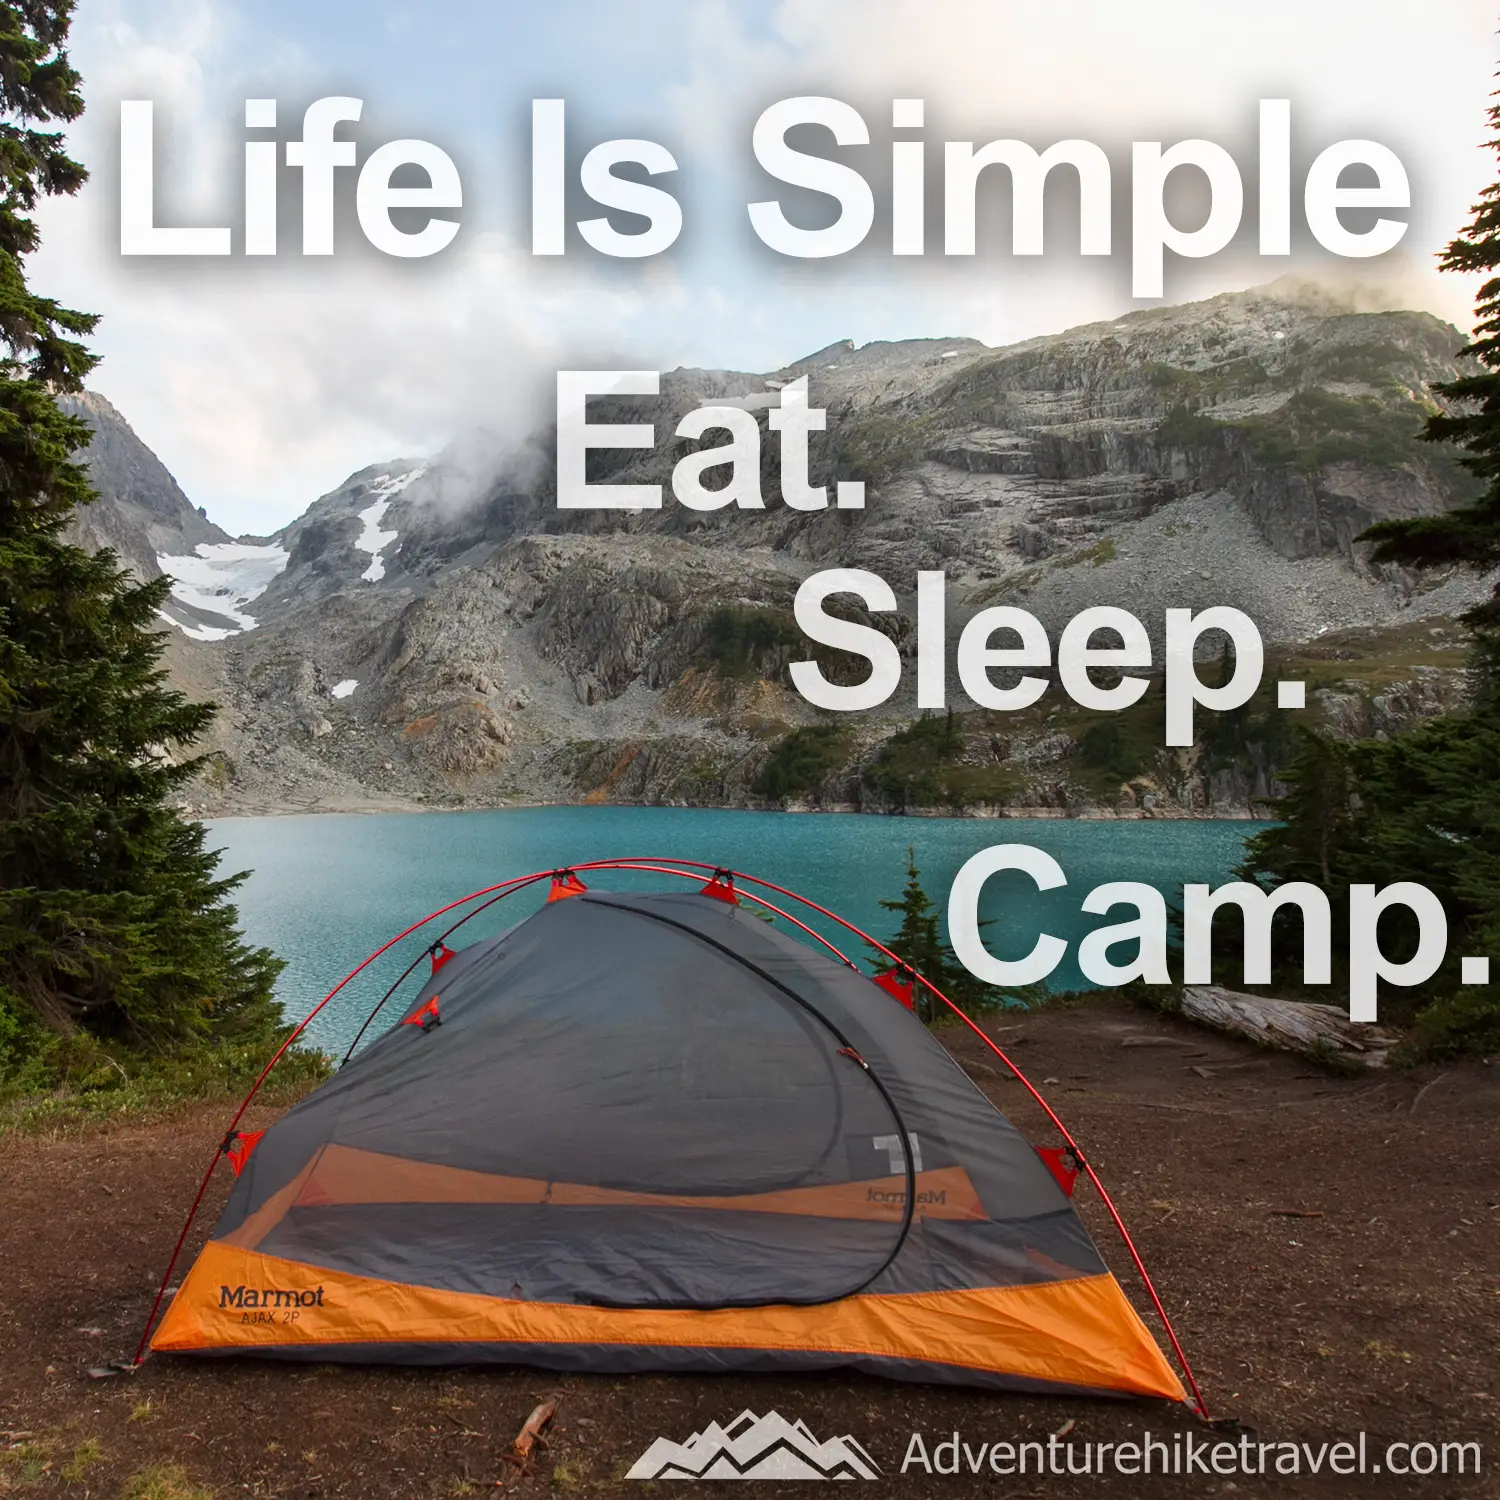 "Life Is Simple Eat. Sleep. Camp." #hiking #quotes #inspirationalquotes #hikingquotes #adventurequotes #outdoors #trekking